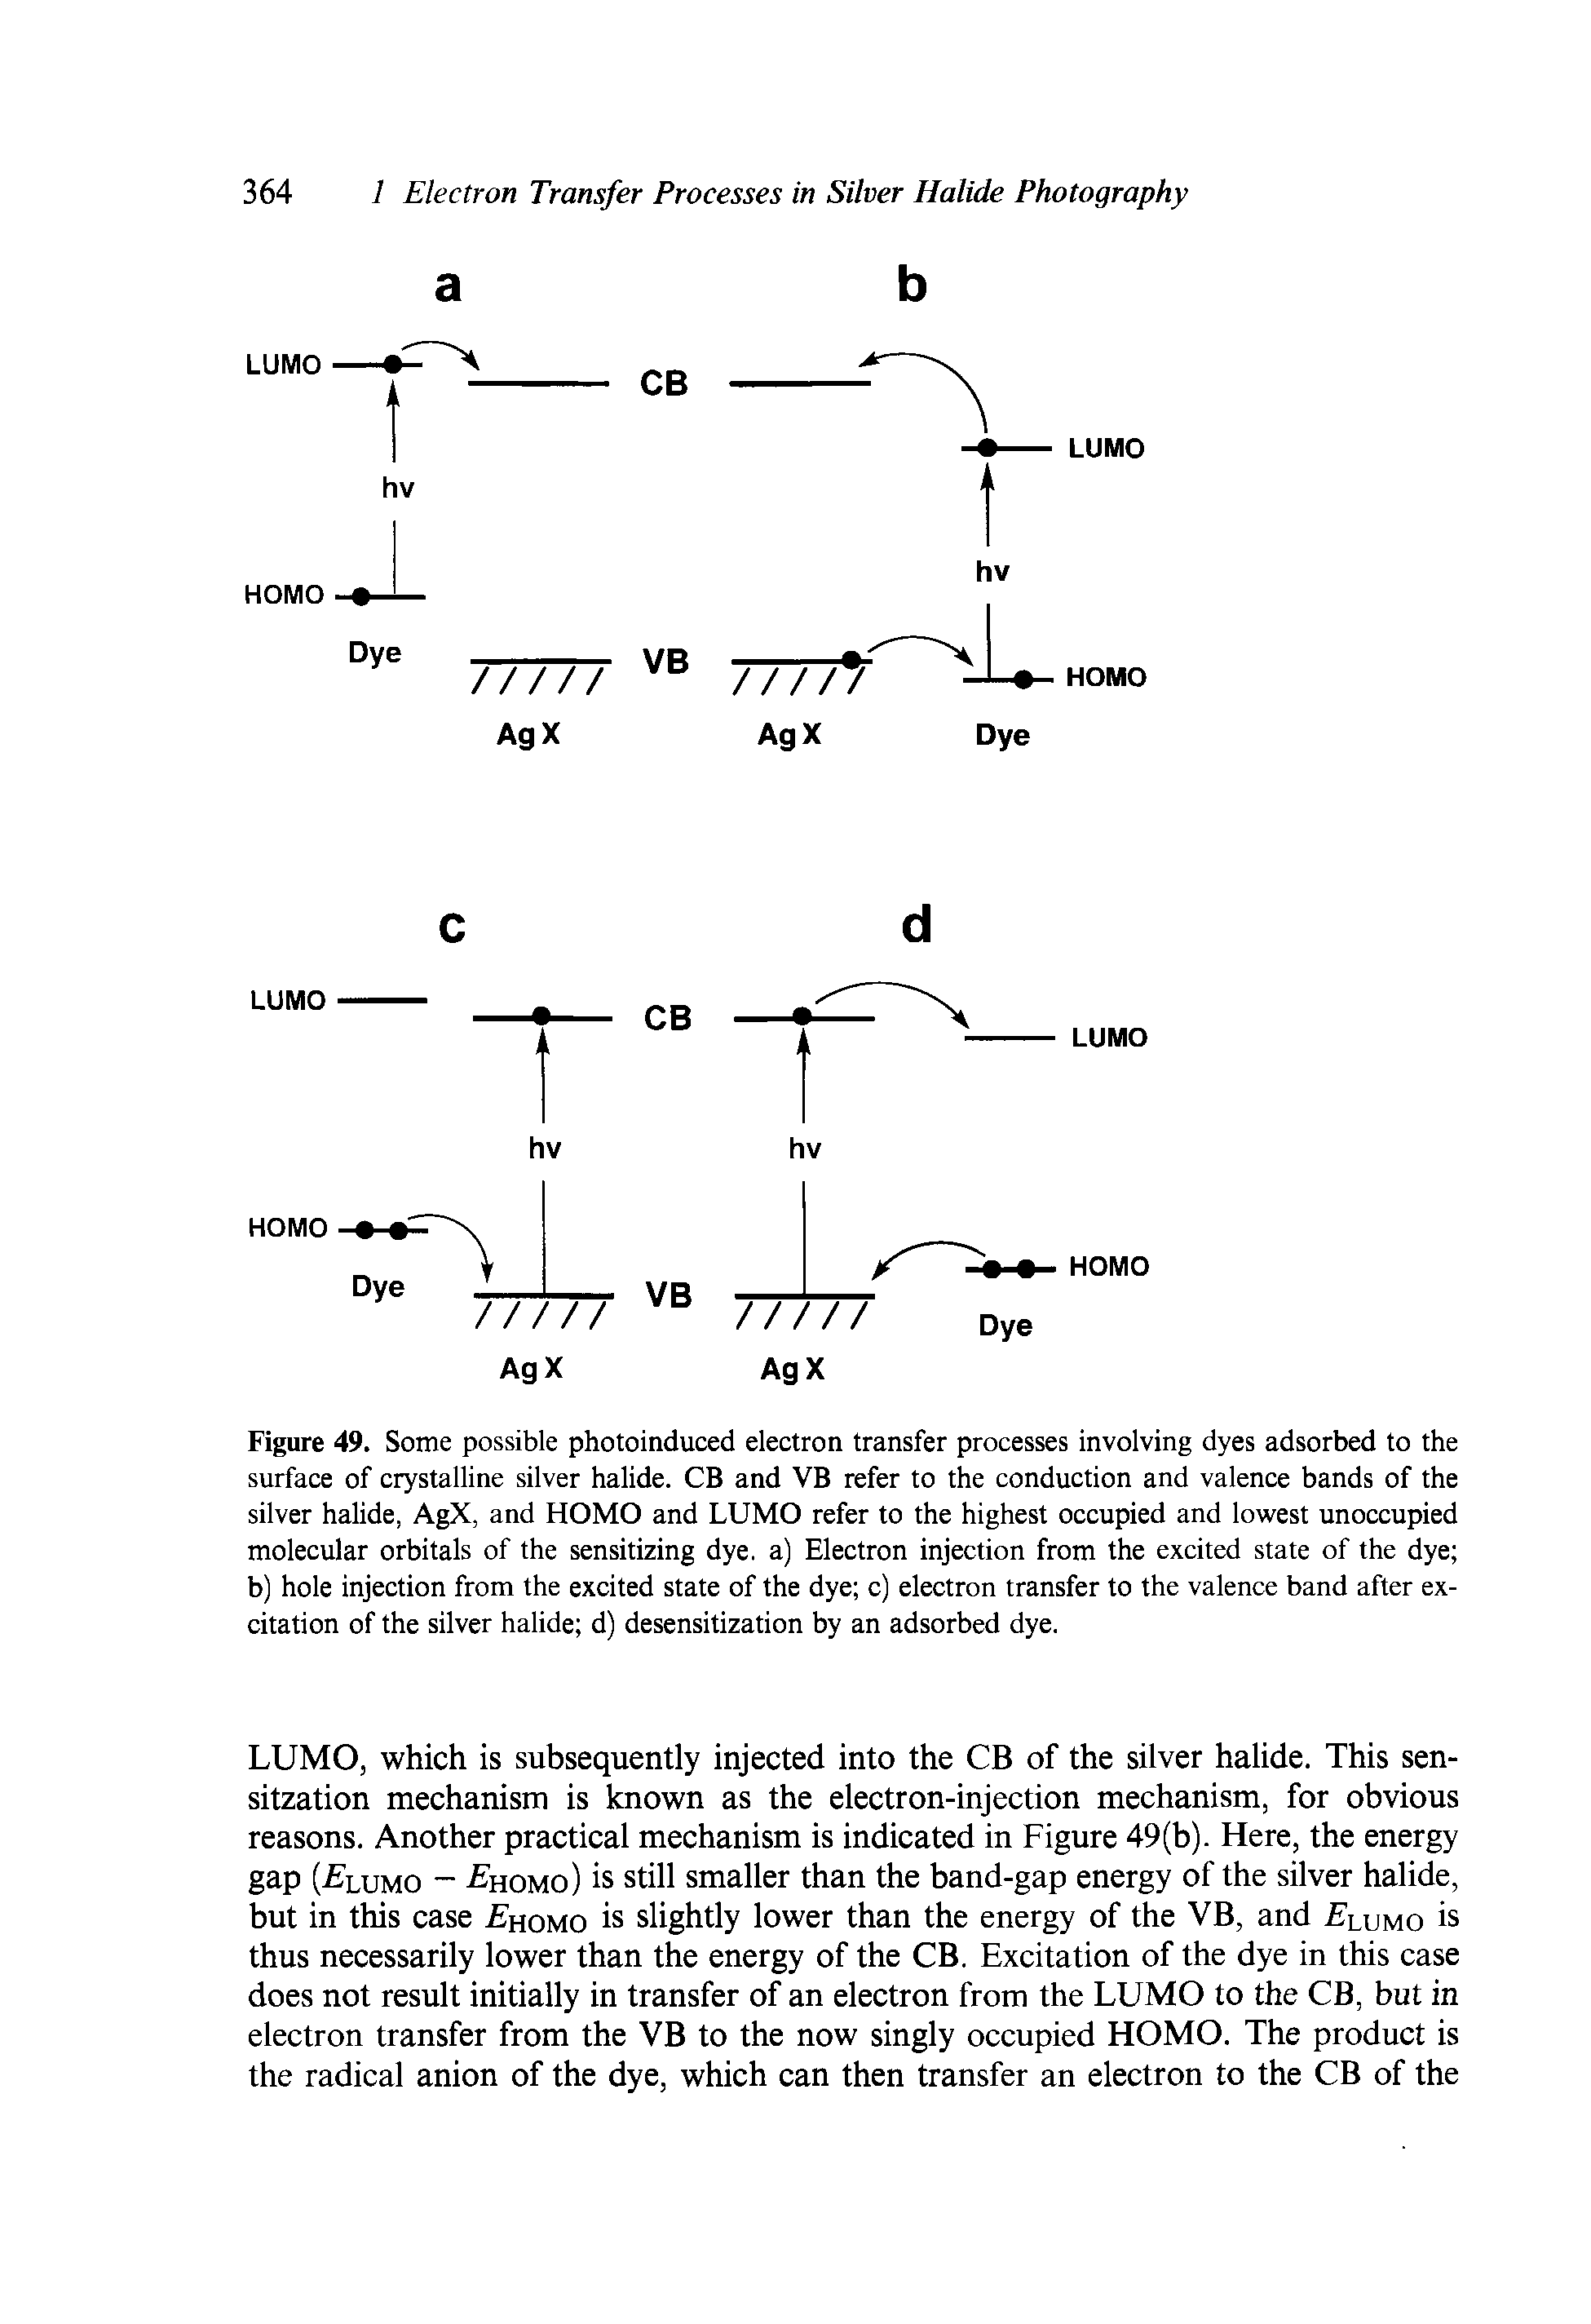 Figure 49. Some possible photoinduced electron transfer processes involving dyes adsorbed to the surface of crystalline silver halide. CB and VB refer to the conduction and valence bands of the silver halide, AgX, and HOMO and LUMO refer to the highest occupied and lowest unoccupied molecular orbitals of the sensitizing dye. a) Electron injection from the excited state of the dye b) hole injection from the excited state of the dye c) electron transfer to the valence band after excitation of the silver halide d) desensitization by an adsorbed dye.